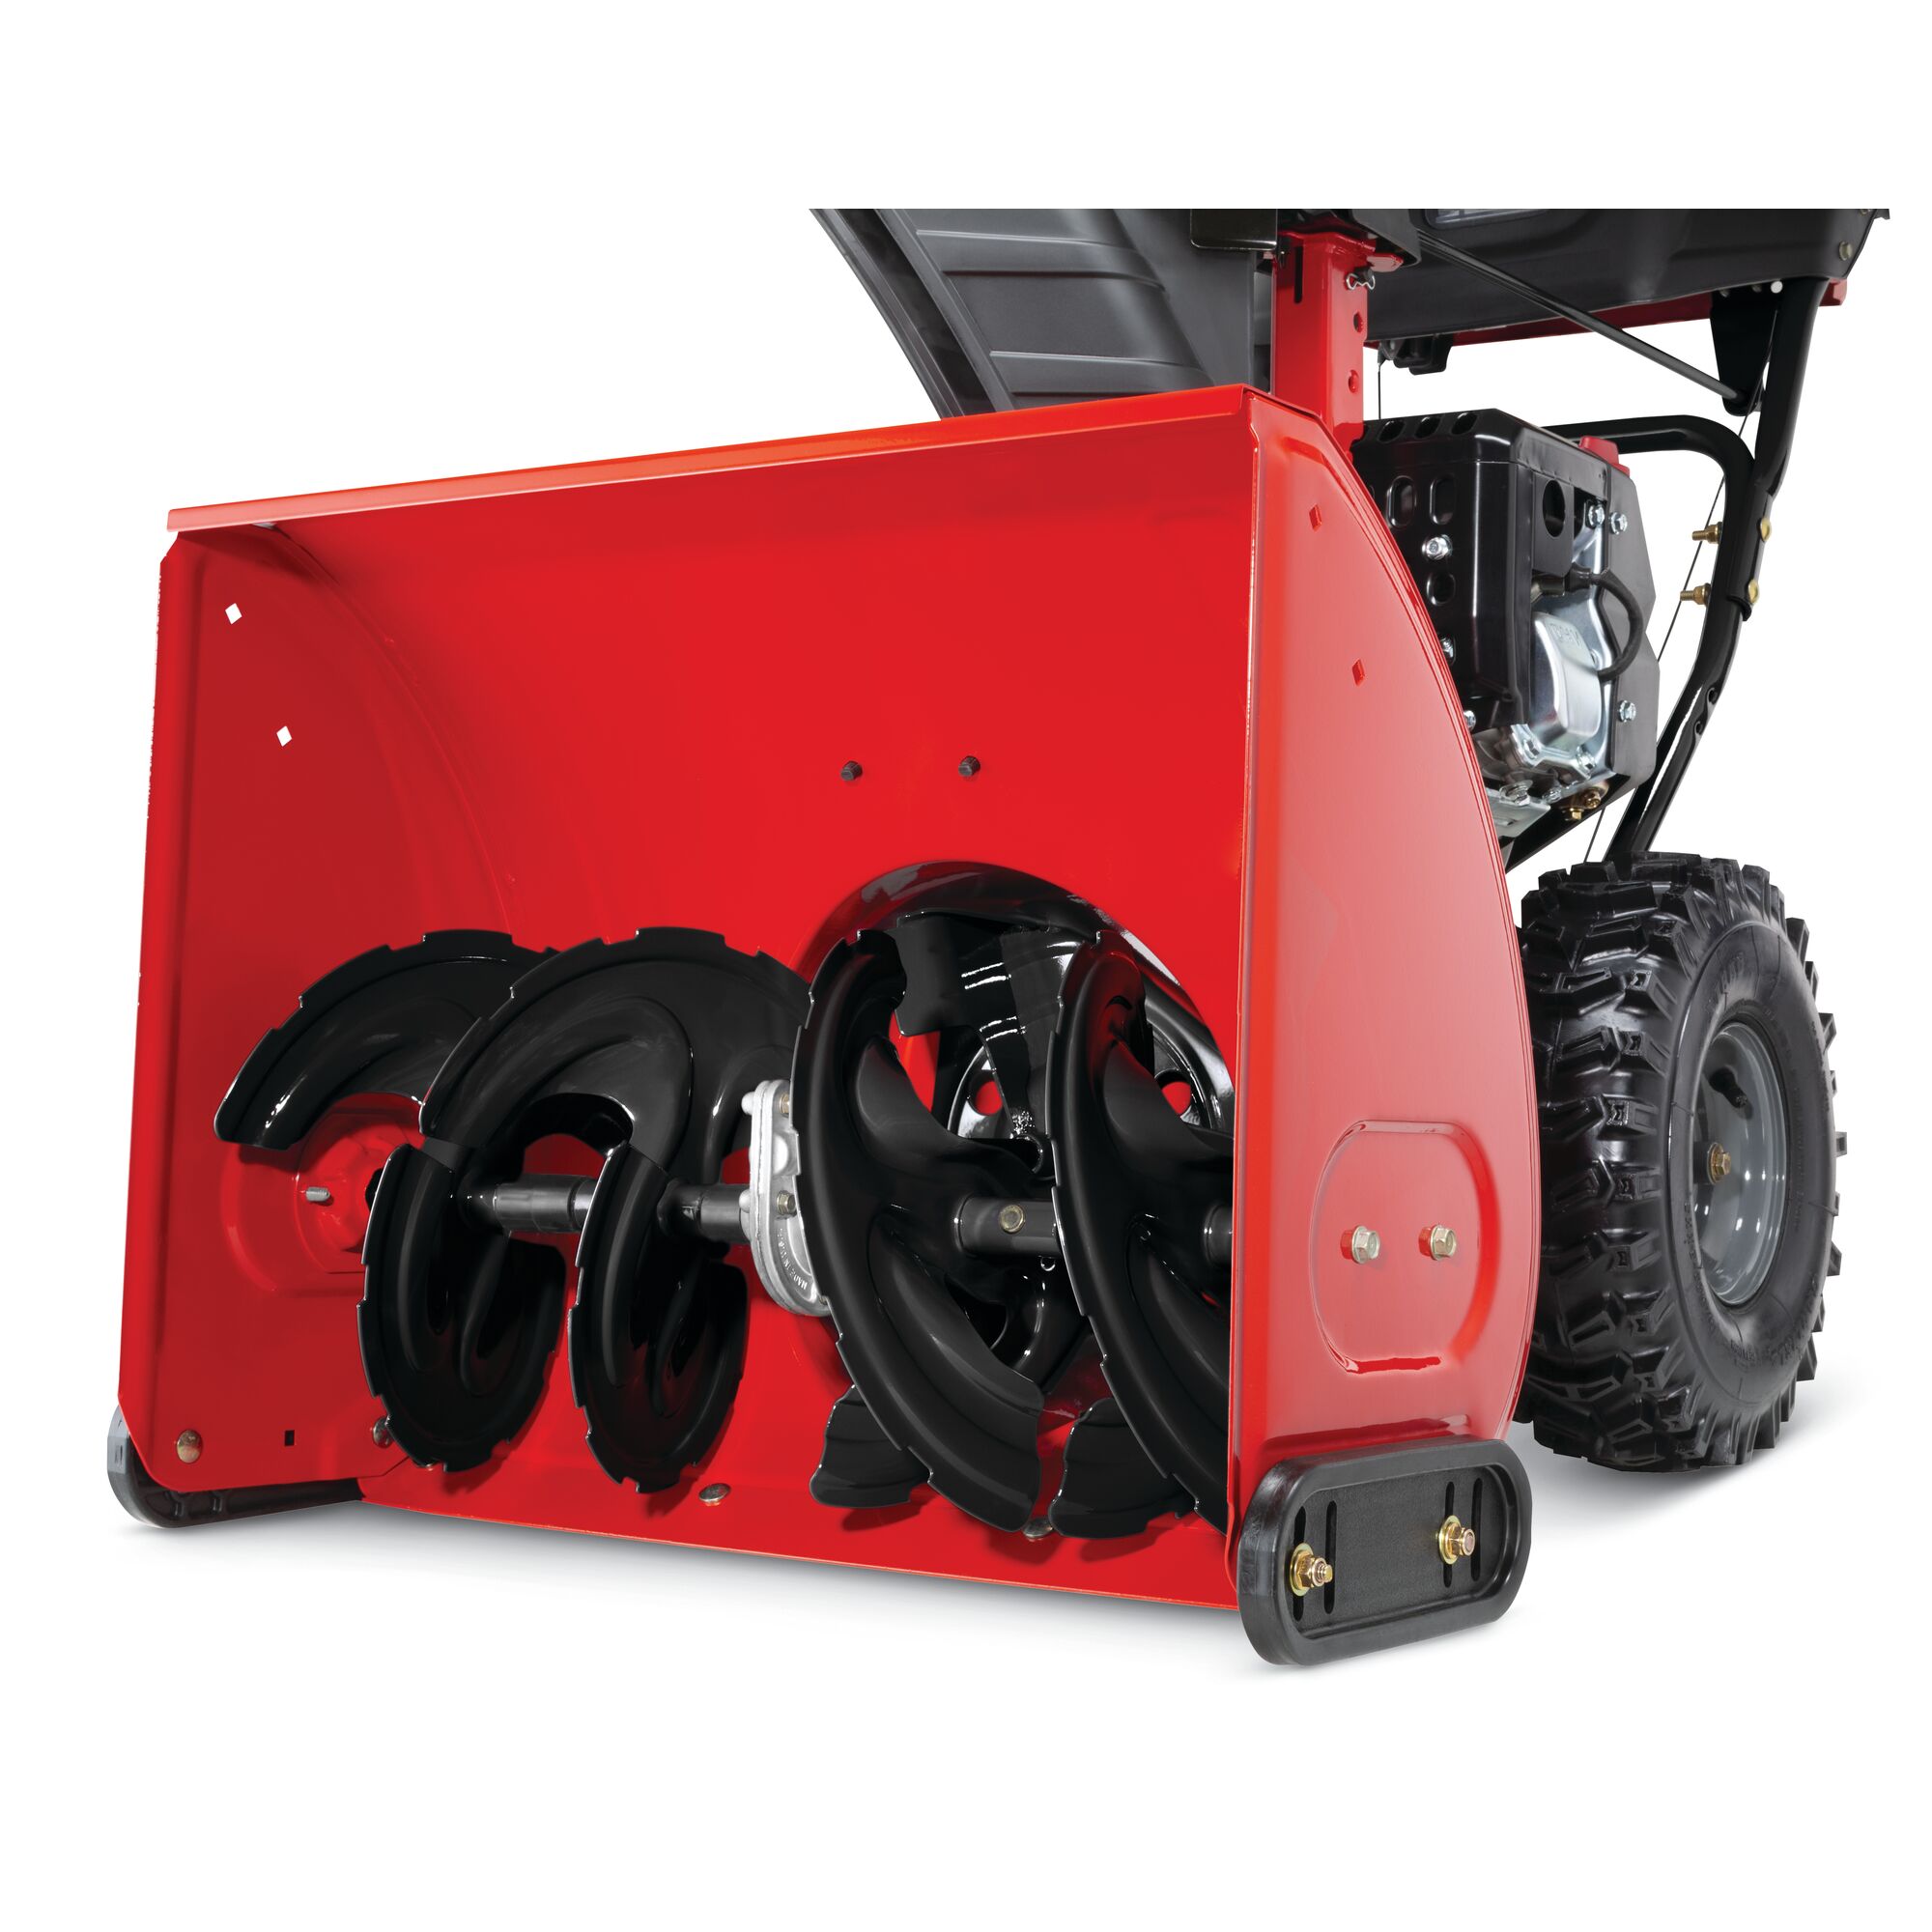 Enhanced clearing power feature in 26 inch 208 CC electric start two stage snow blower.